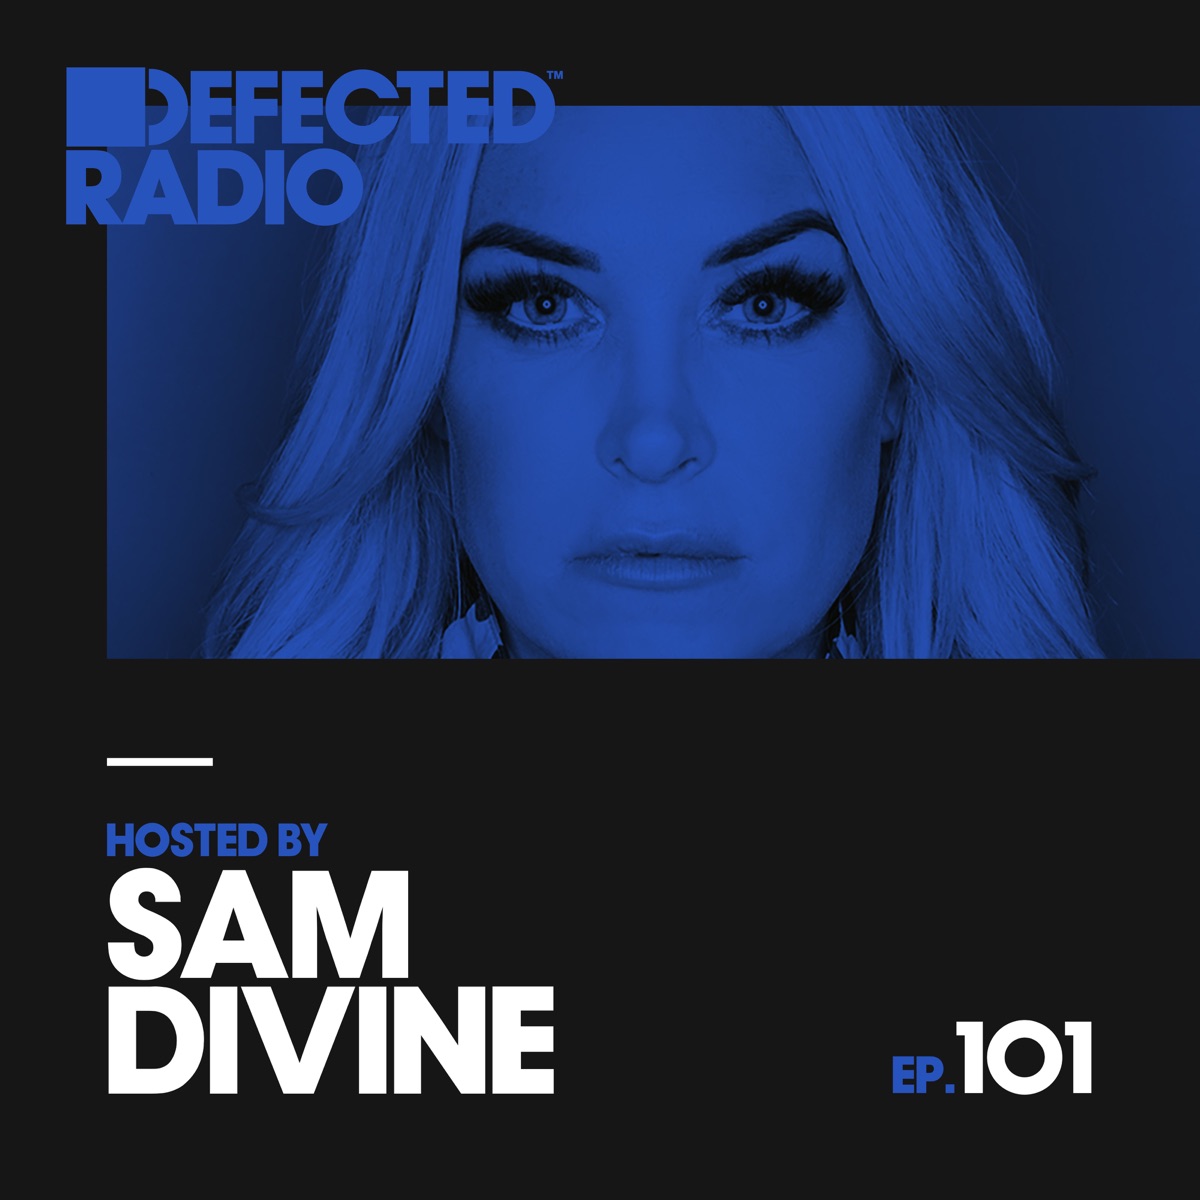 Defected Radio Episode 106 (hosted by Sam Divine) by Defected Radio on  Apple Music